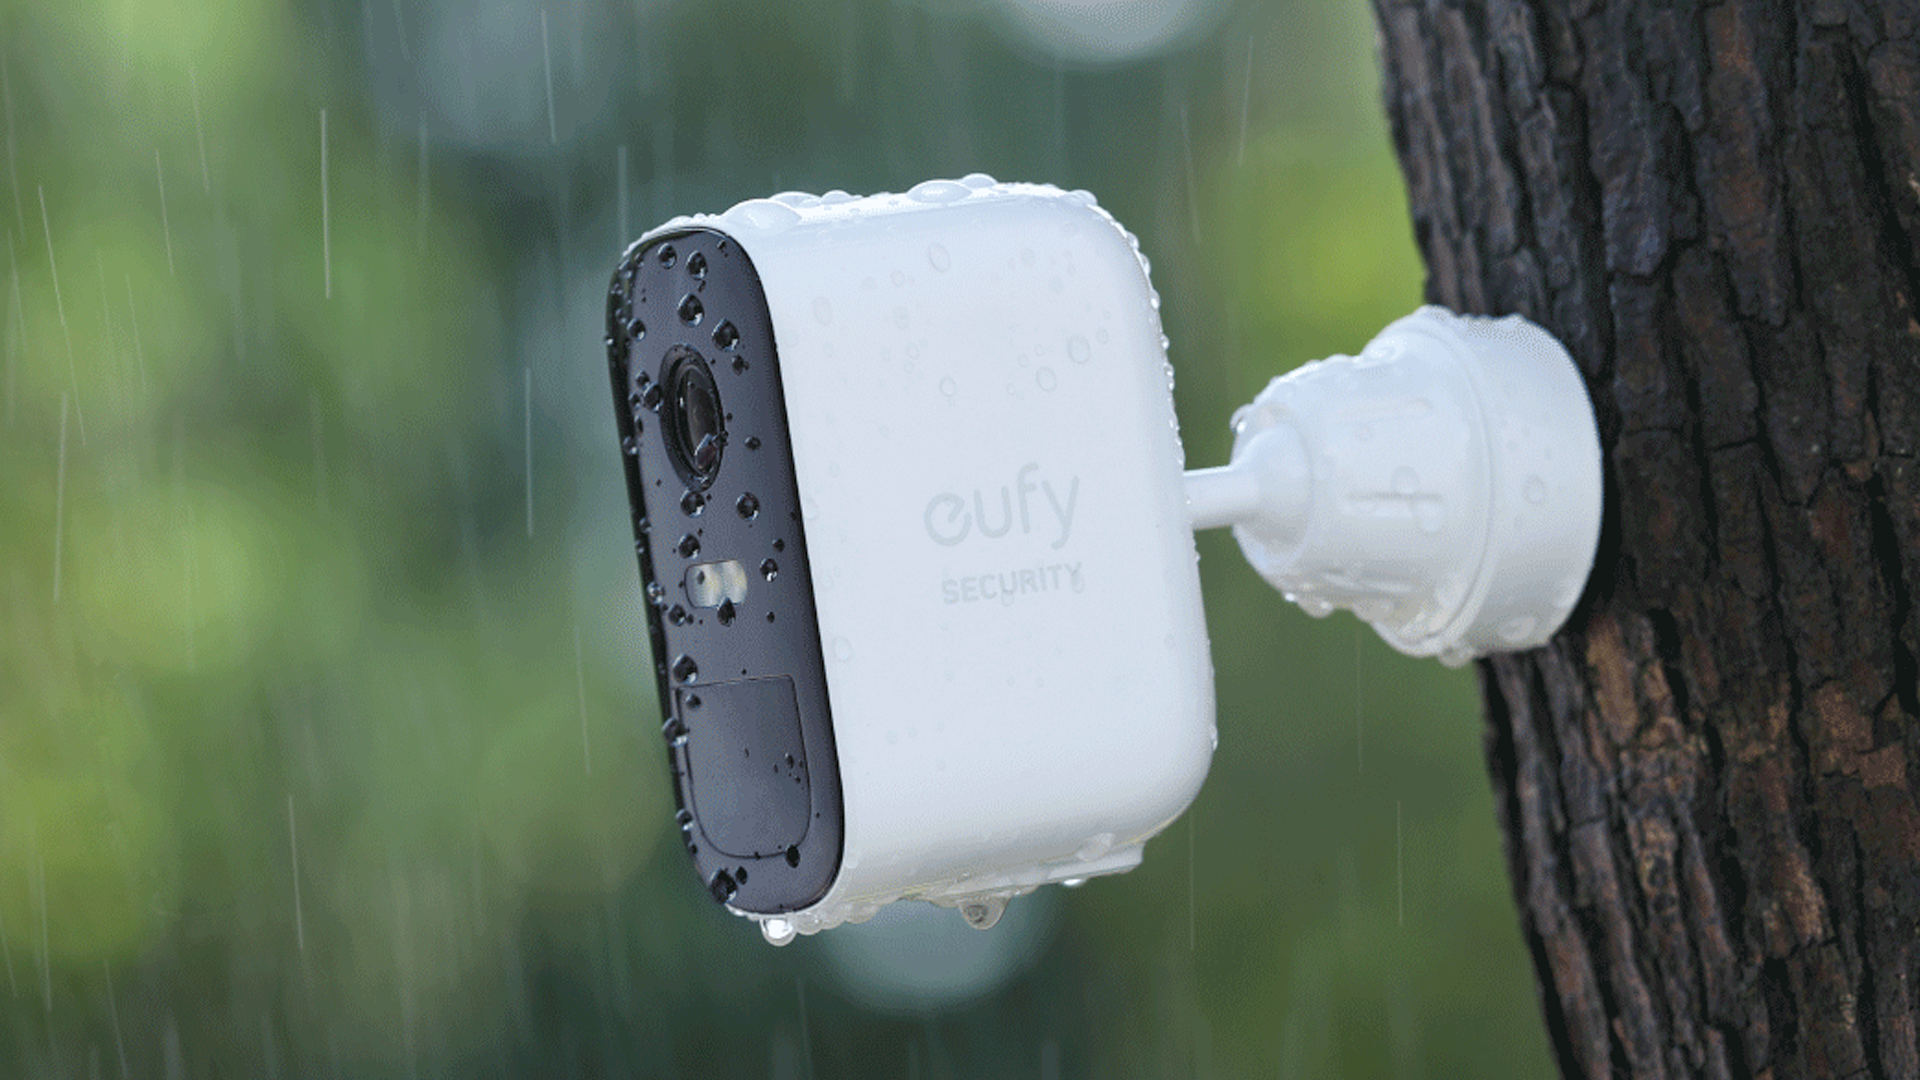 An Eufy smart security camera in the rain.